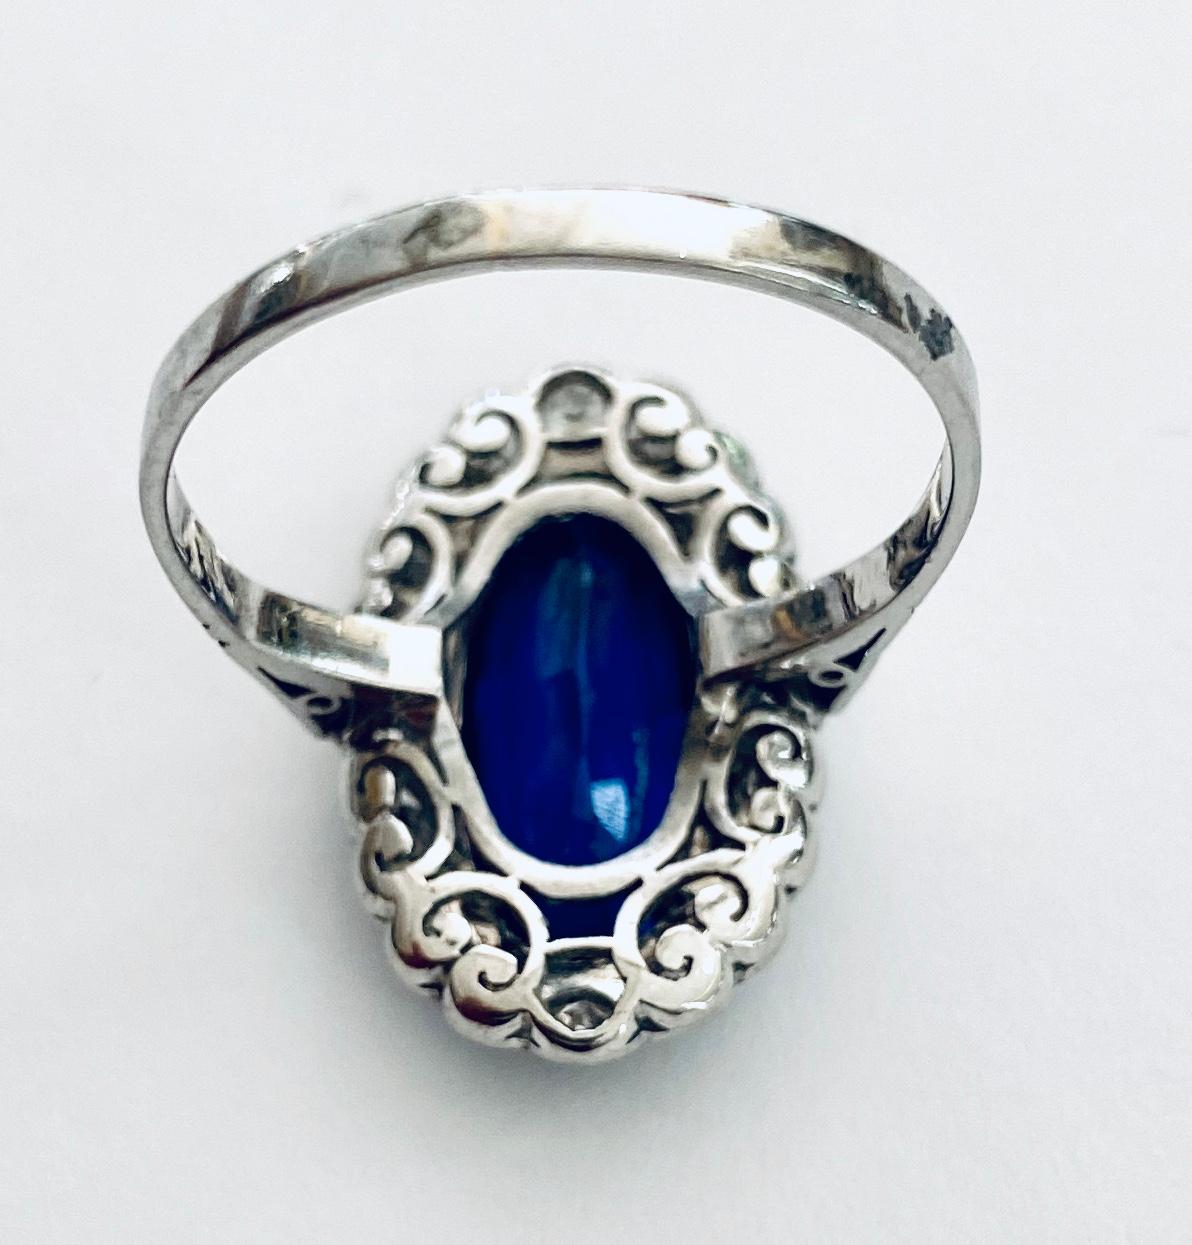 French Cut Platinum Ring Set with 20 Diamonds and 1 Synthetic Sapphire, France, 1925 For Sale